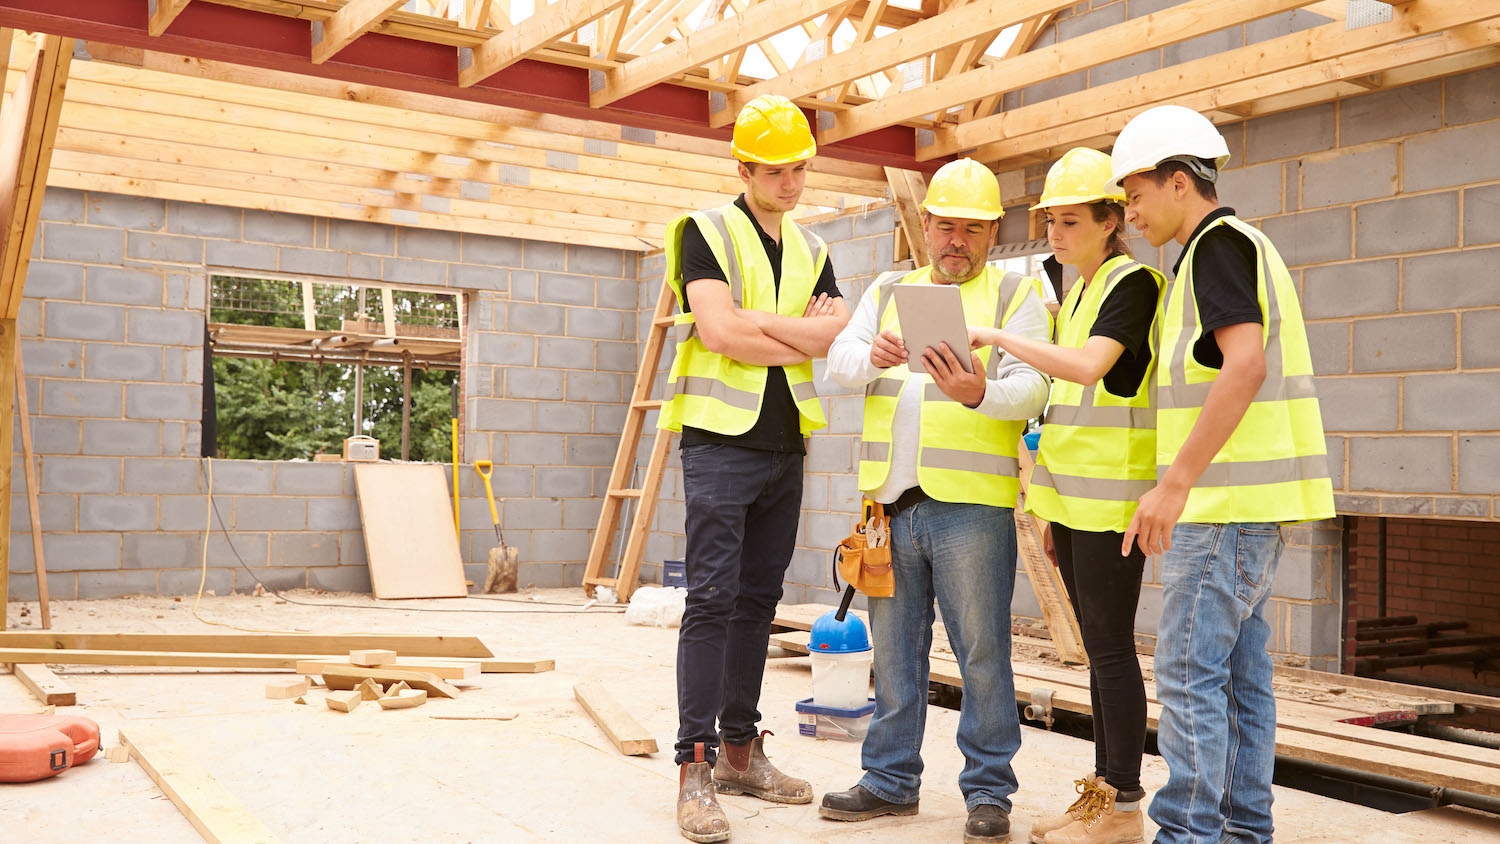 apprentices learning on site, dreamstime